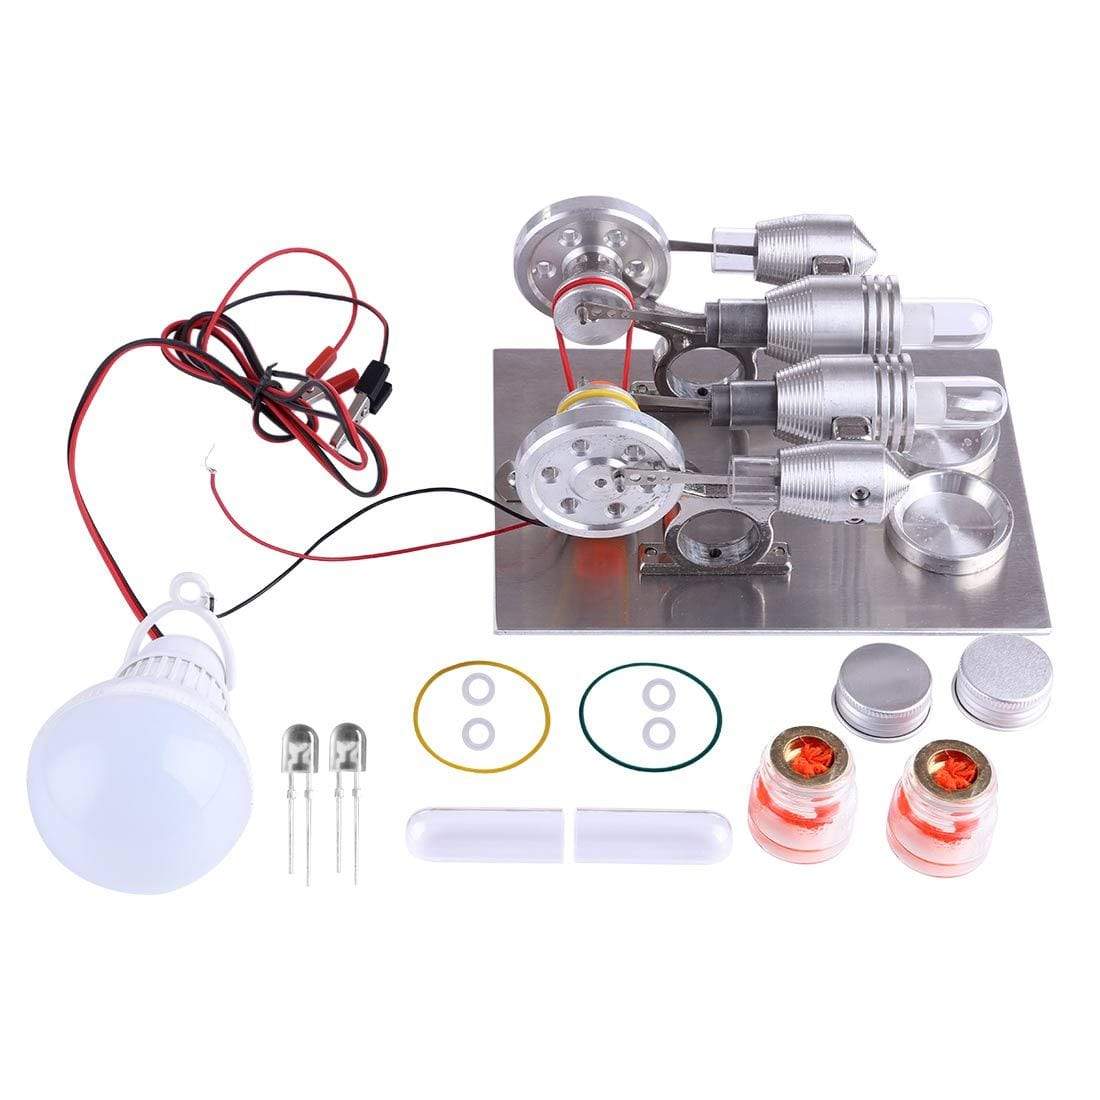 Double Cylinder Stirling Engine Motor Model Educational Toy Electricity Generator Physics Science Experiment Kits 1